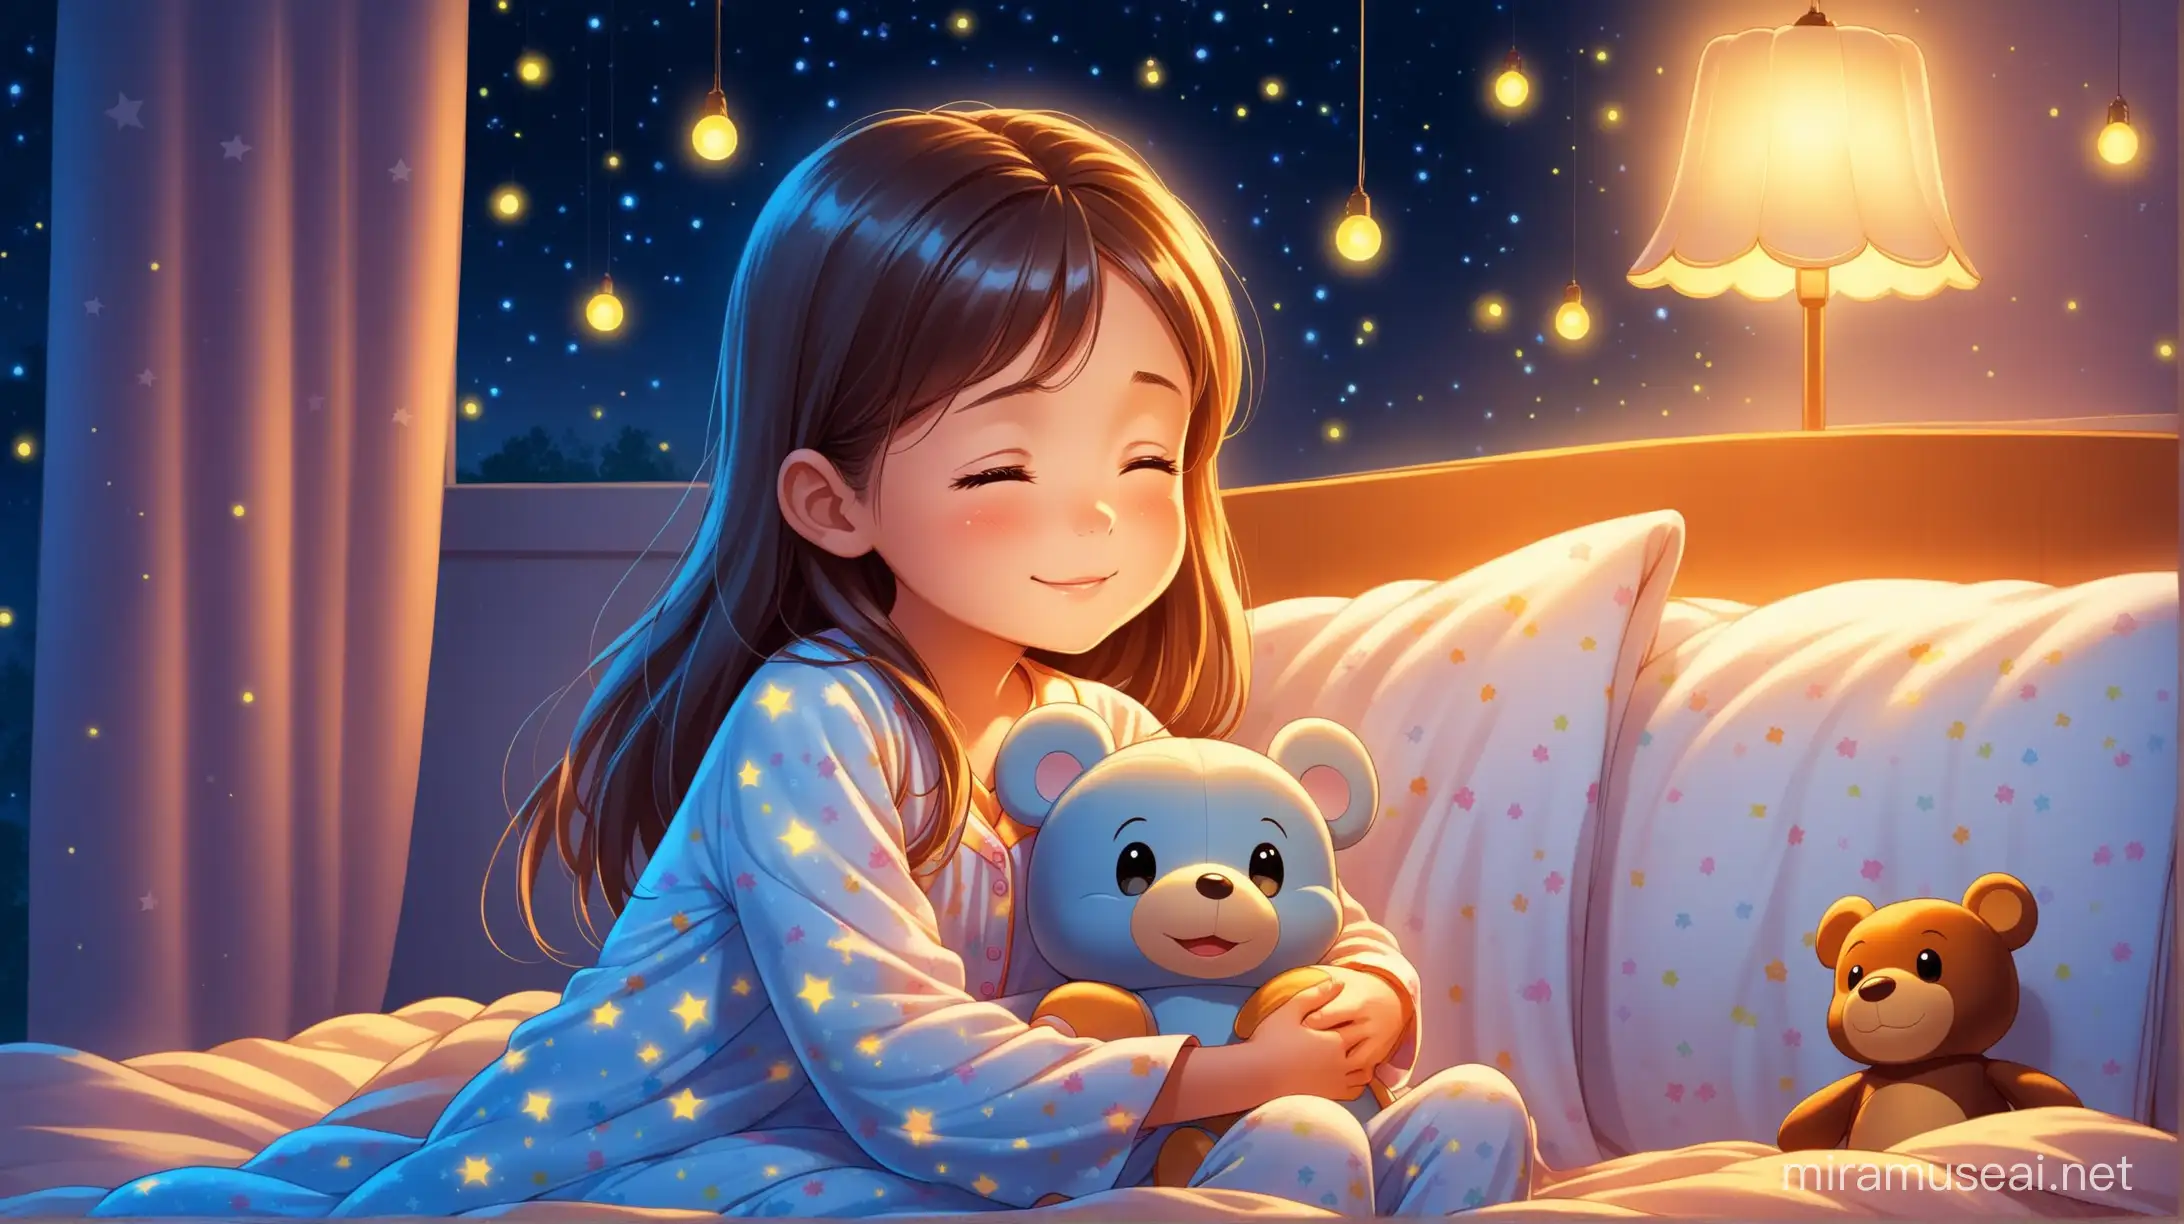 Happy Girl in Pajamas Hugging Soft Toy with Moonlight Glow